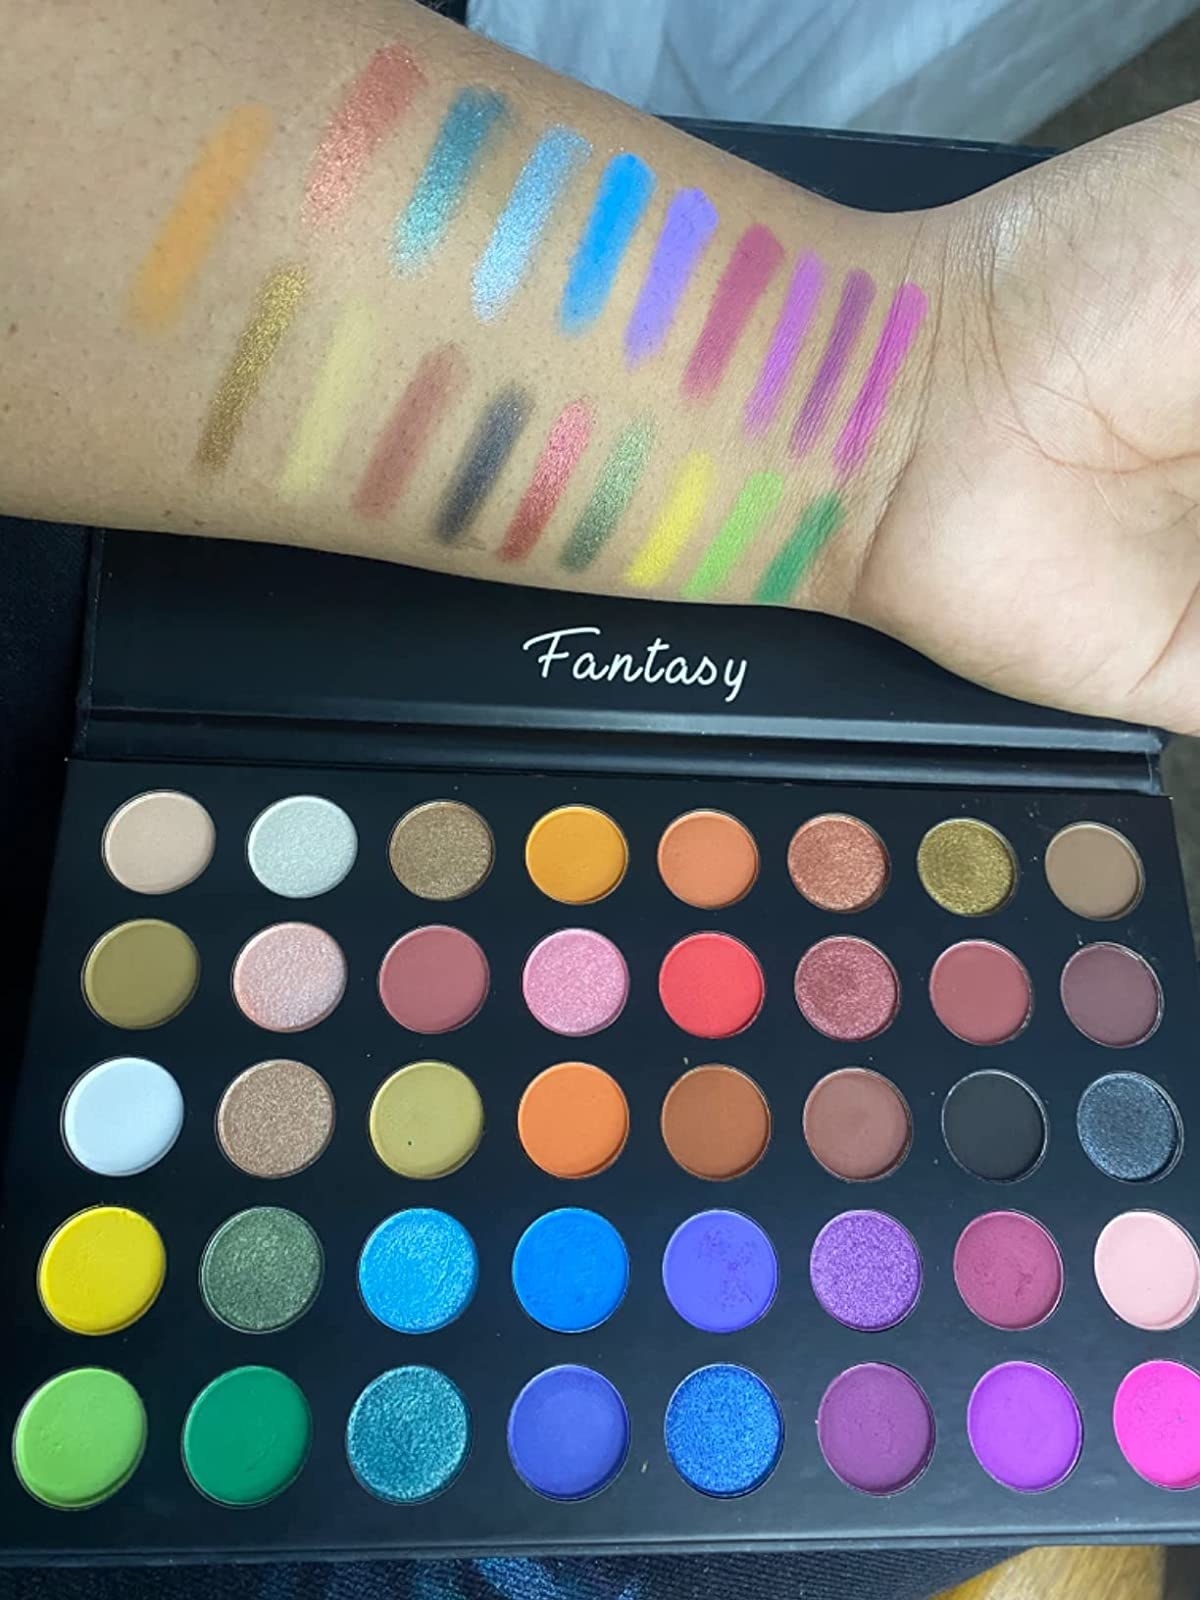 reviewer image of the full palette with swatches on their arm